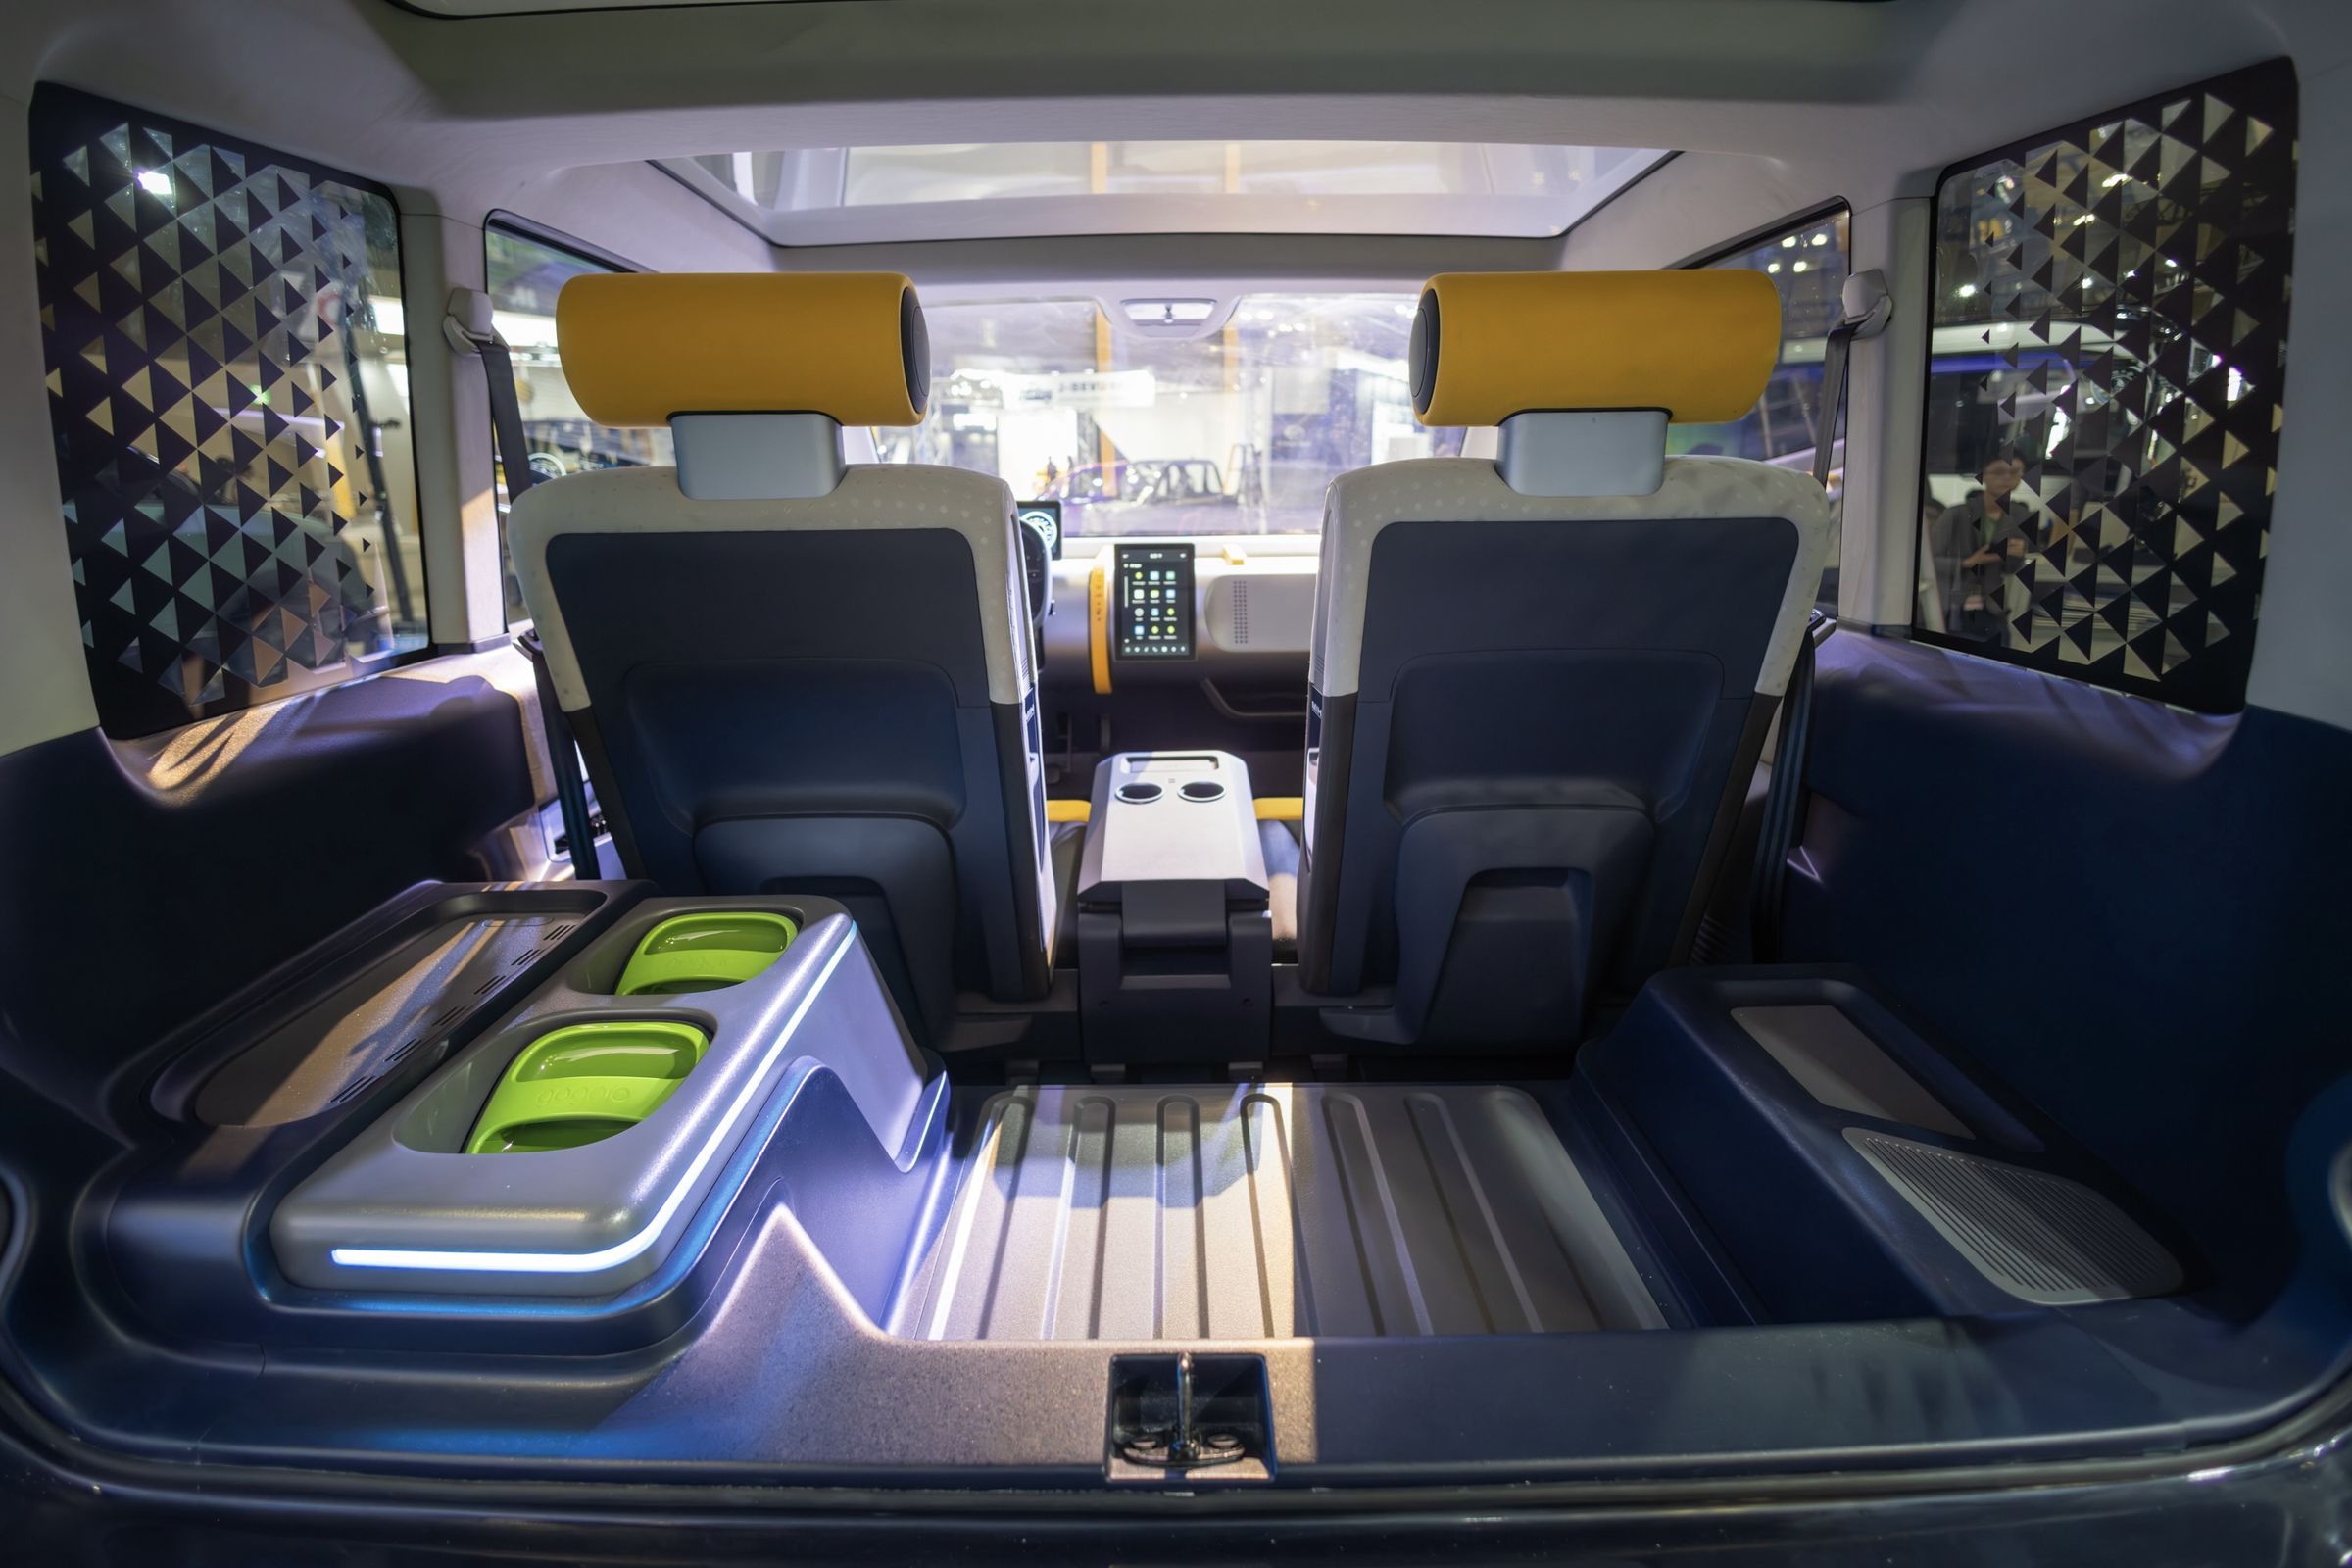 rear interior of small car with side bench for a third passenger and two green battery packs to the left.